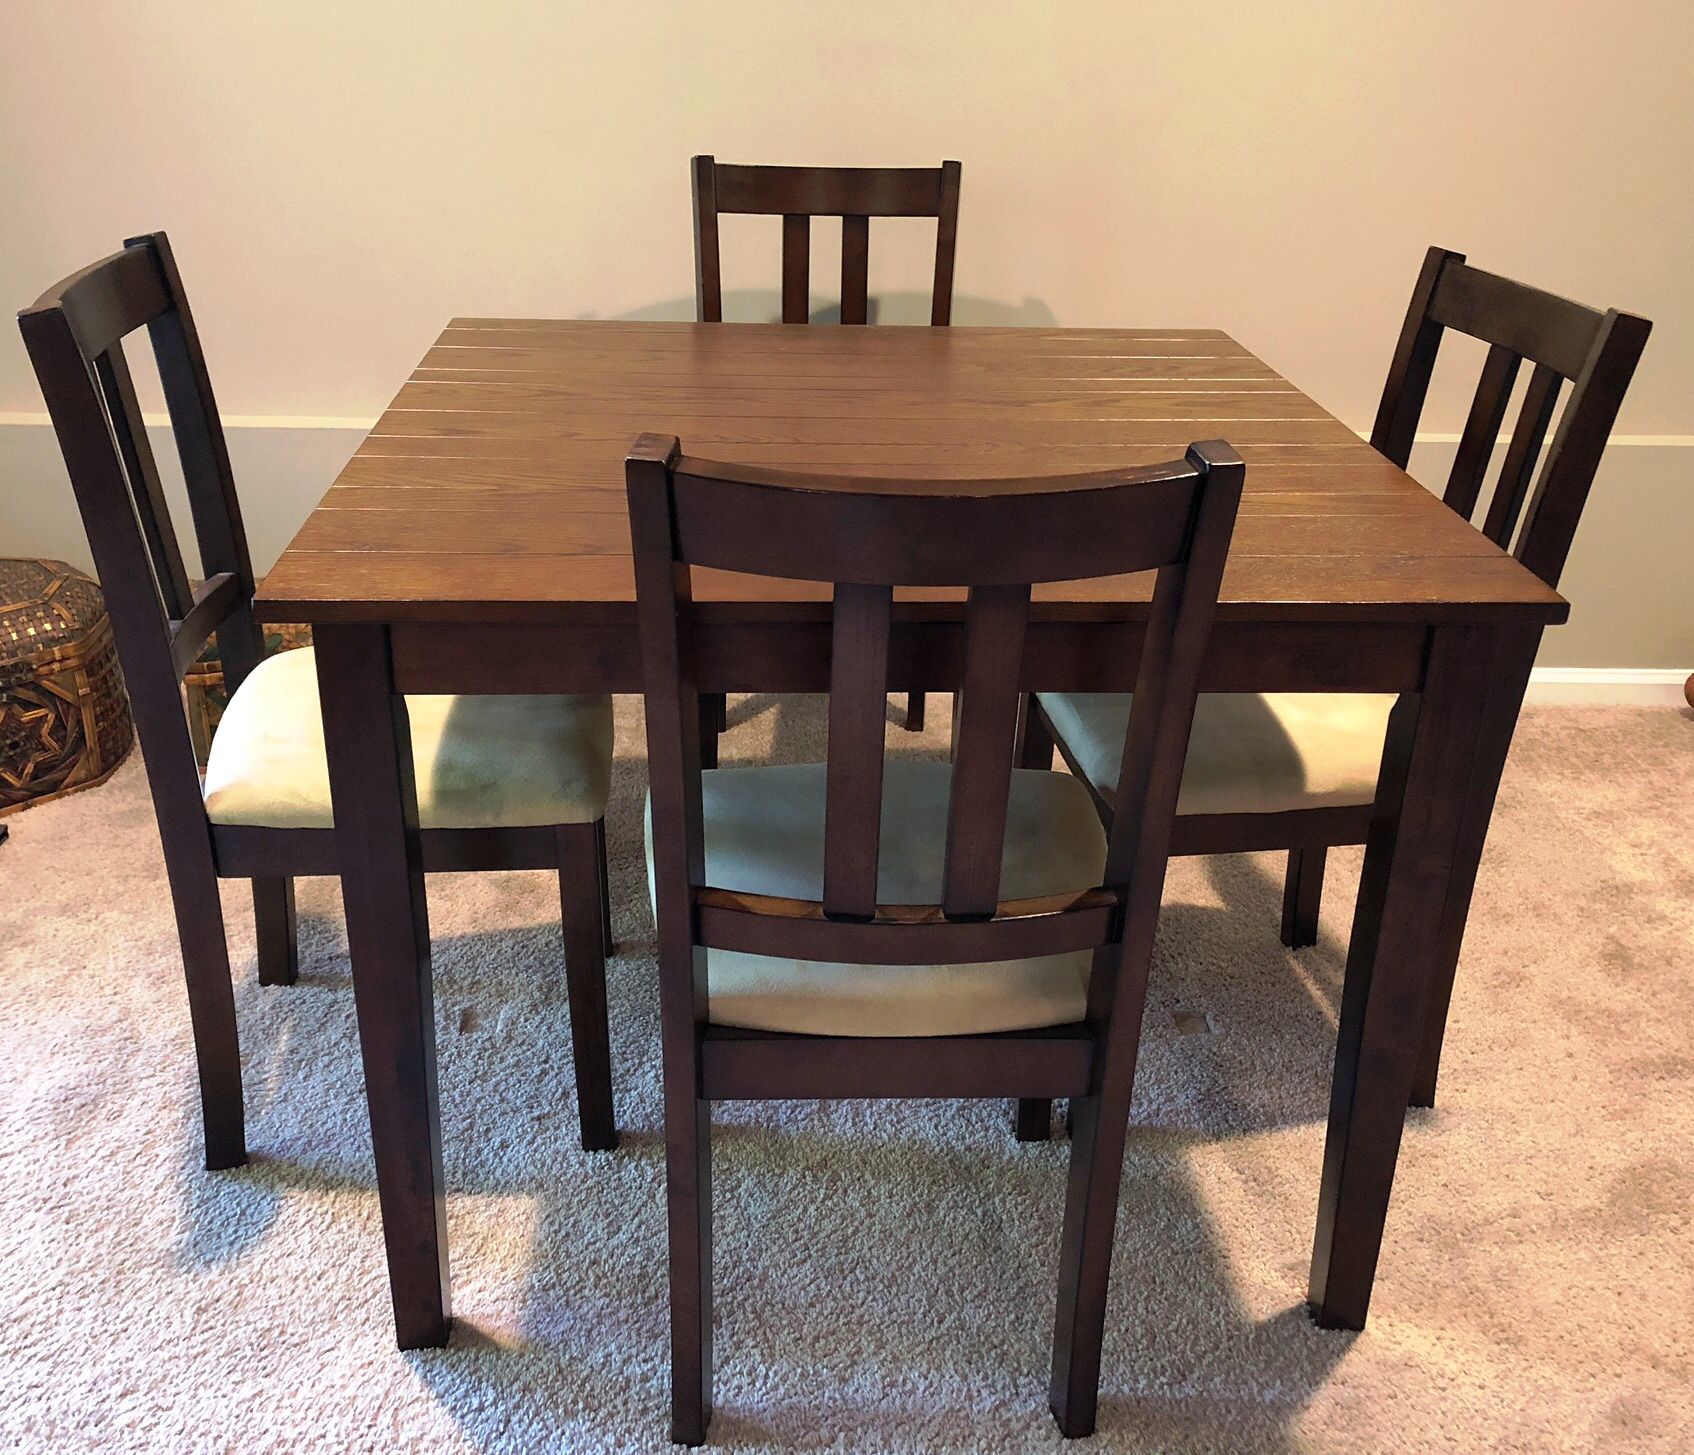 5 piece Dining set. Table and chairs.